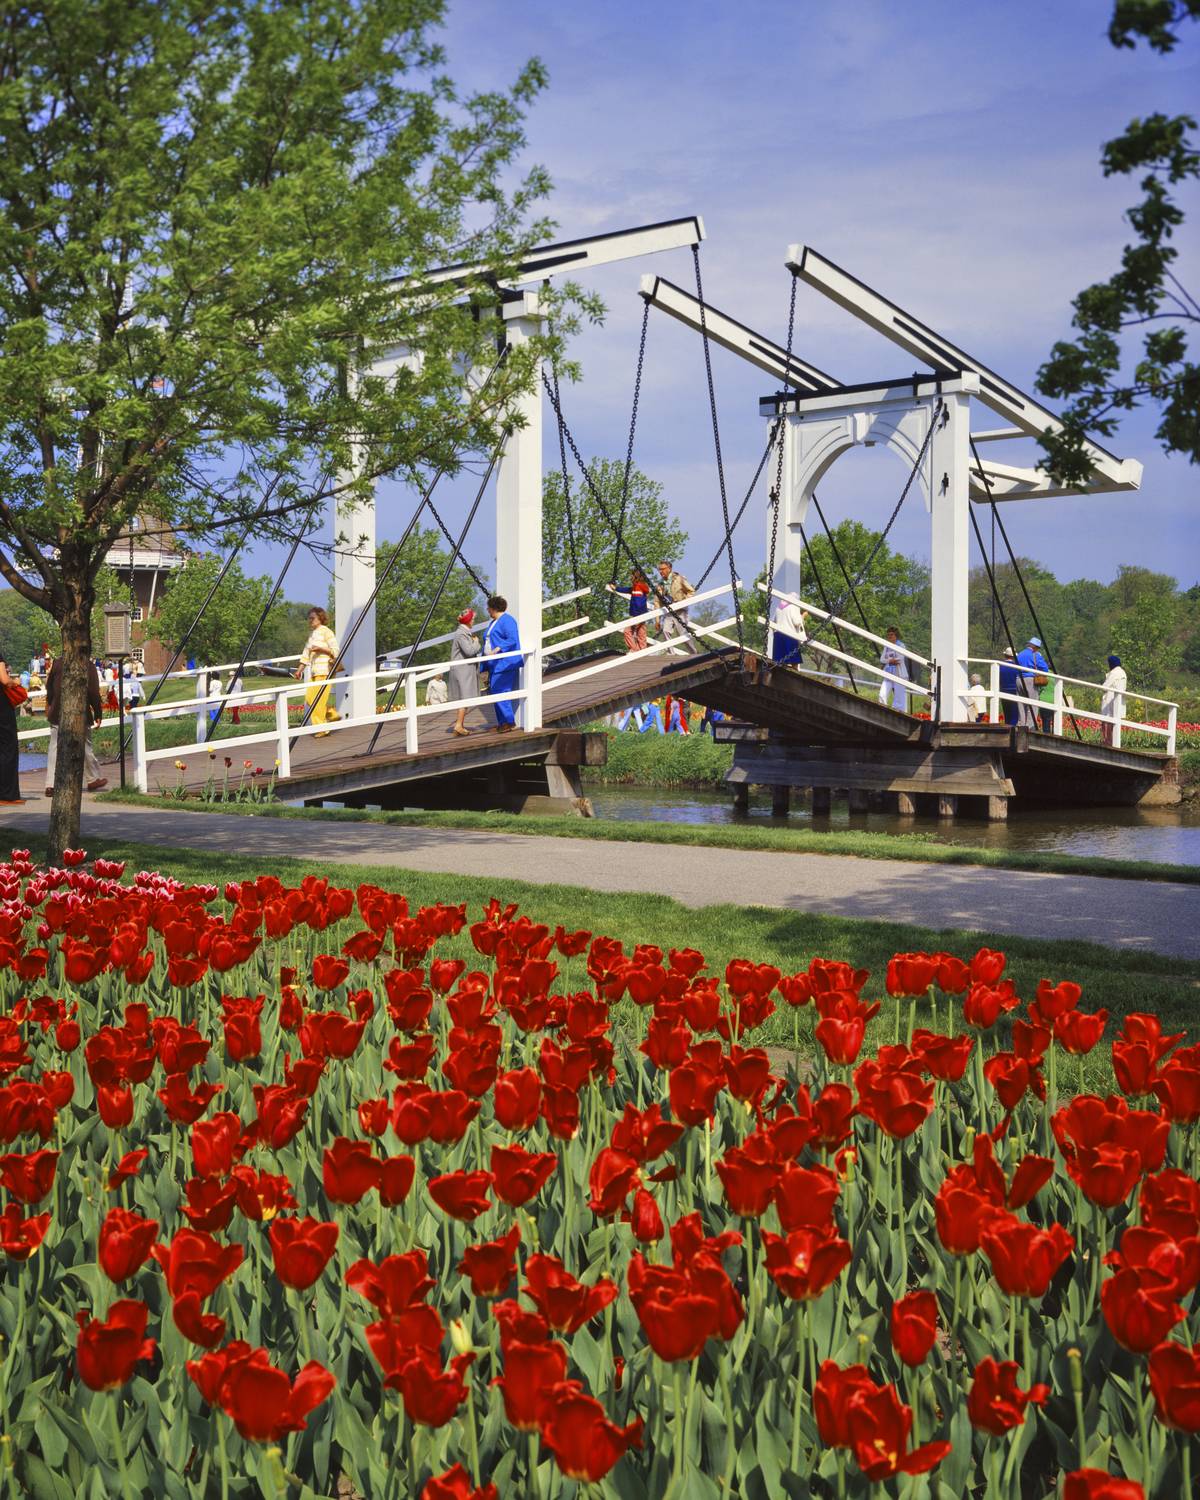 <p>This little Dutch-inspired slice of the Netherlands is actually located in Holland, Michigan. Dutch settlers founded the town back in 1847 and injected all of their homeland culture into the new community.</p> <p>The town is home to the DeZwaan Windmill, the only authentic and operational Dutch windmill in the United States.</p>